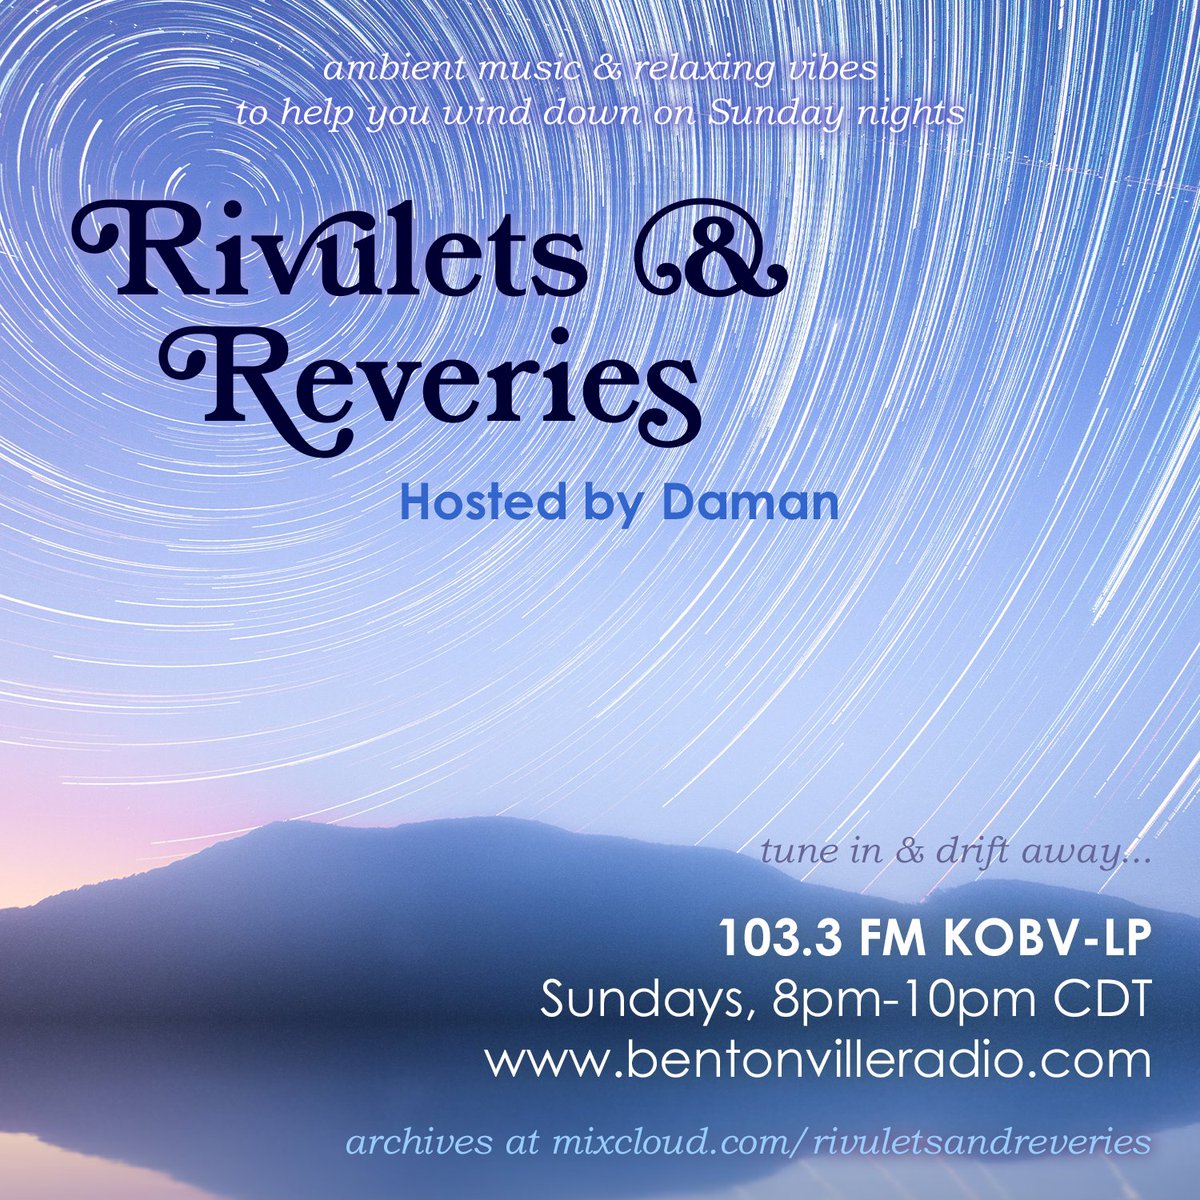 Tune in & drift away this Sunday on @KOBV1033